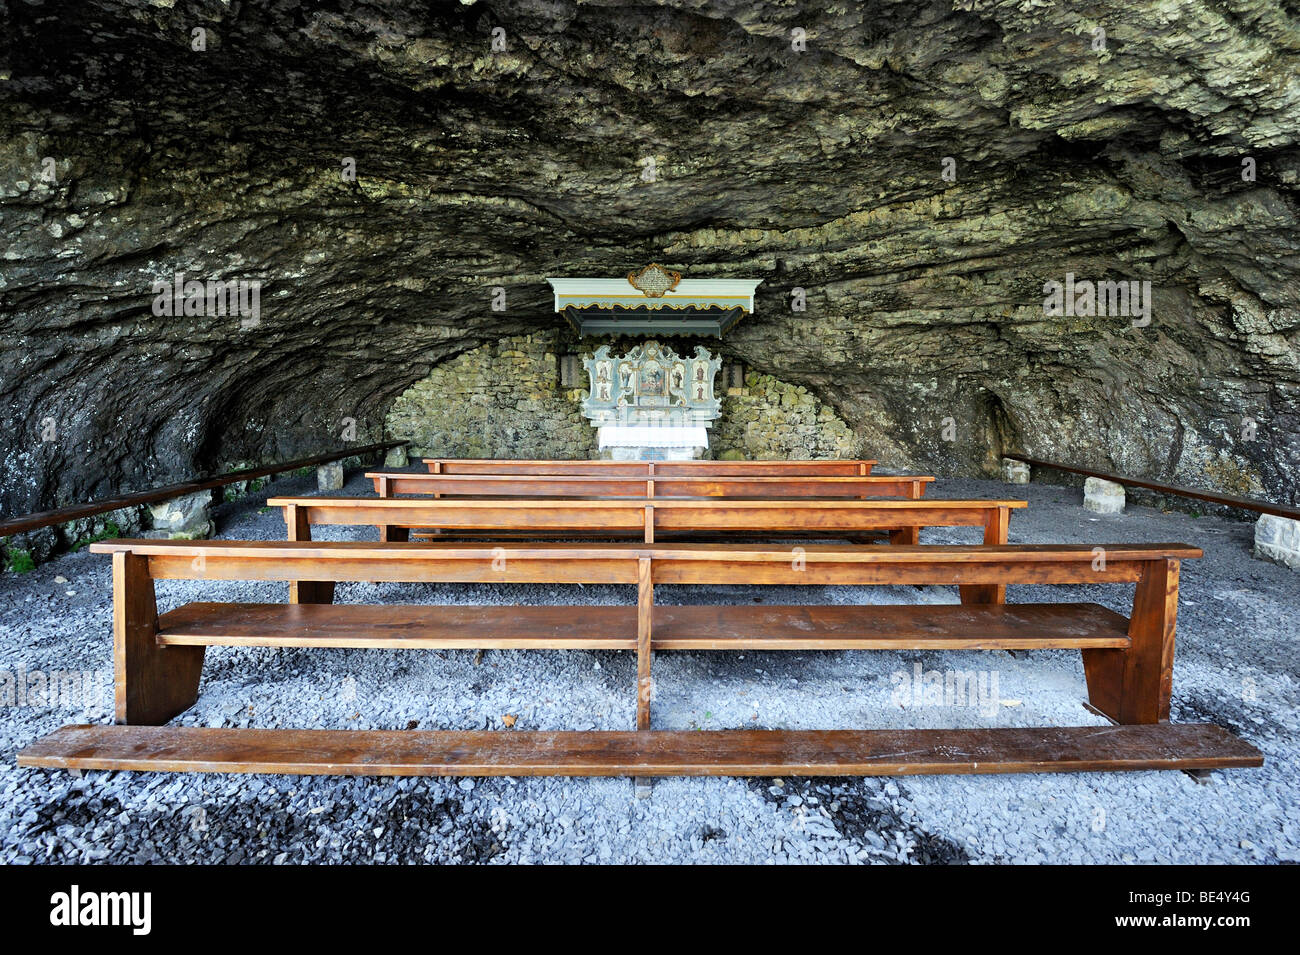 Cave shrine at the Wildkirchli caves below Ebenalp Mountain at 1400 meters, Canton of Appenzell Innerrhoden, Switzerland, Europe Stock Photo